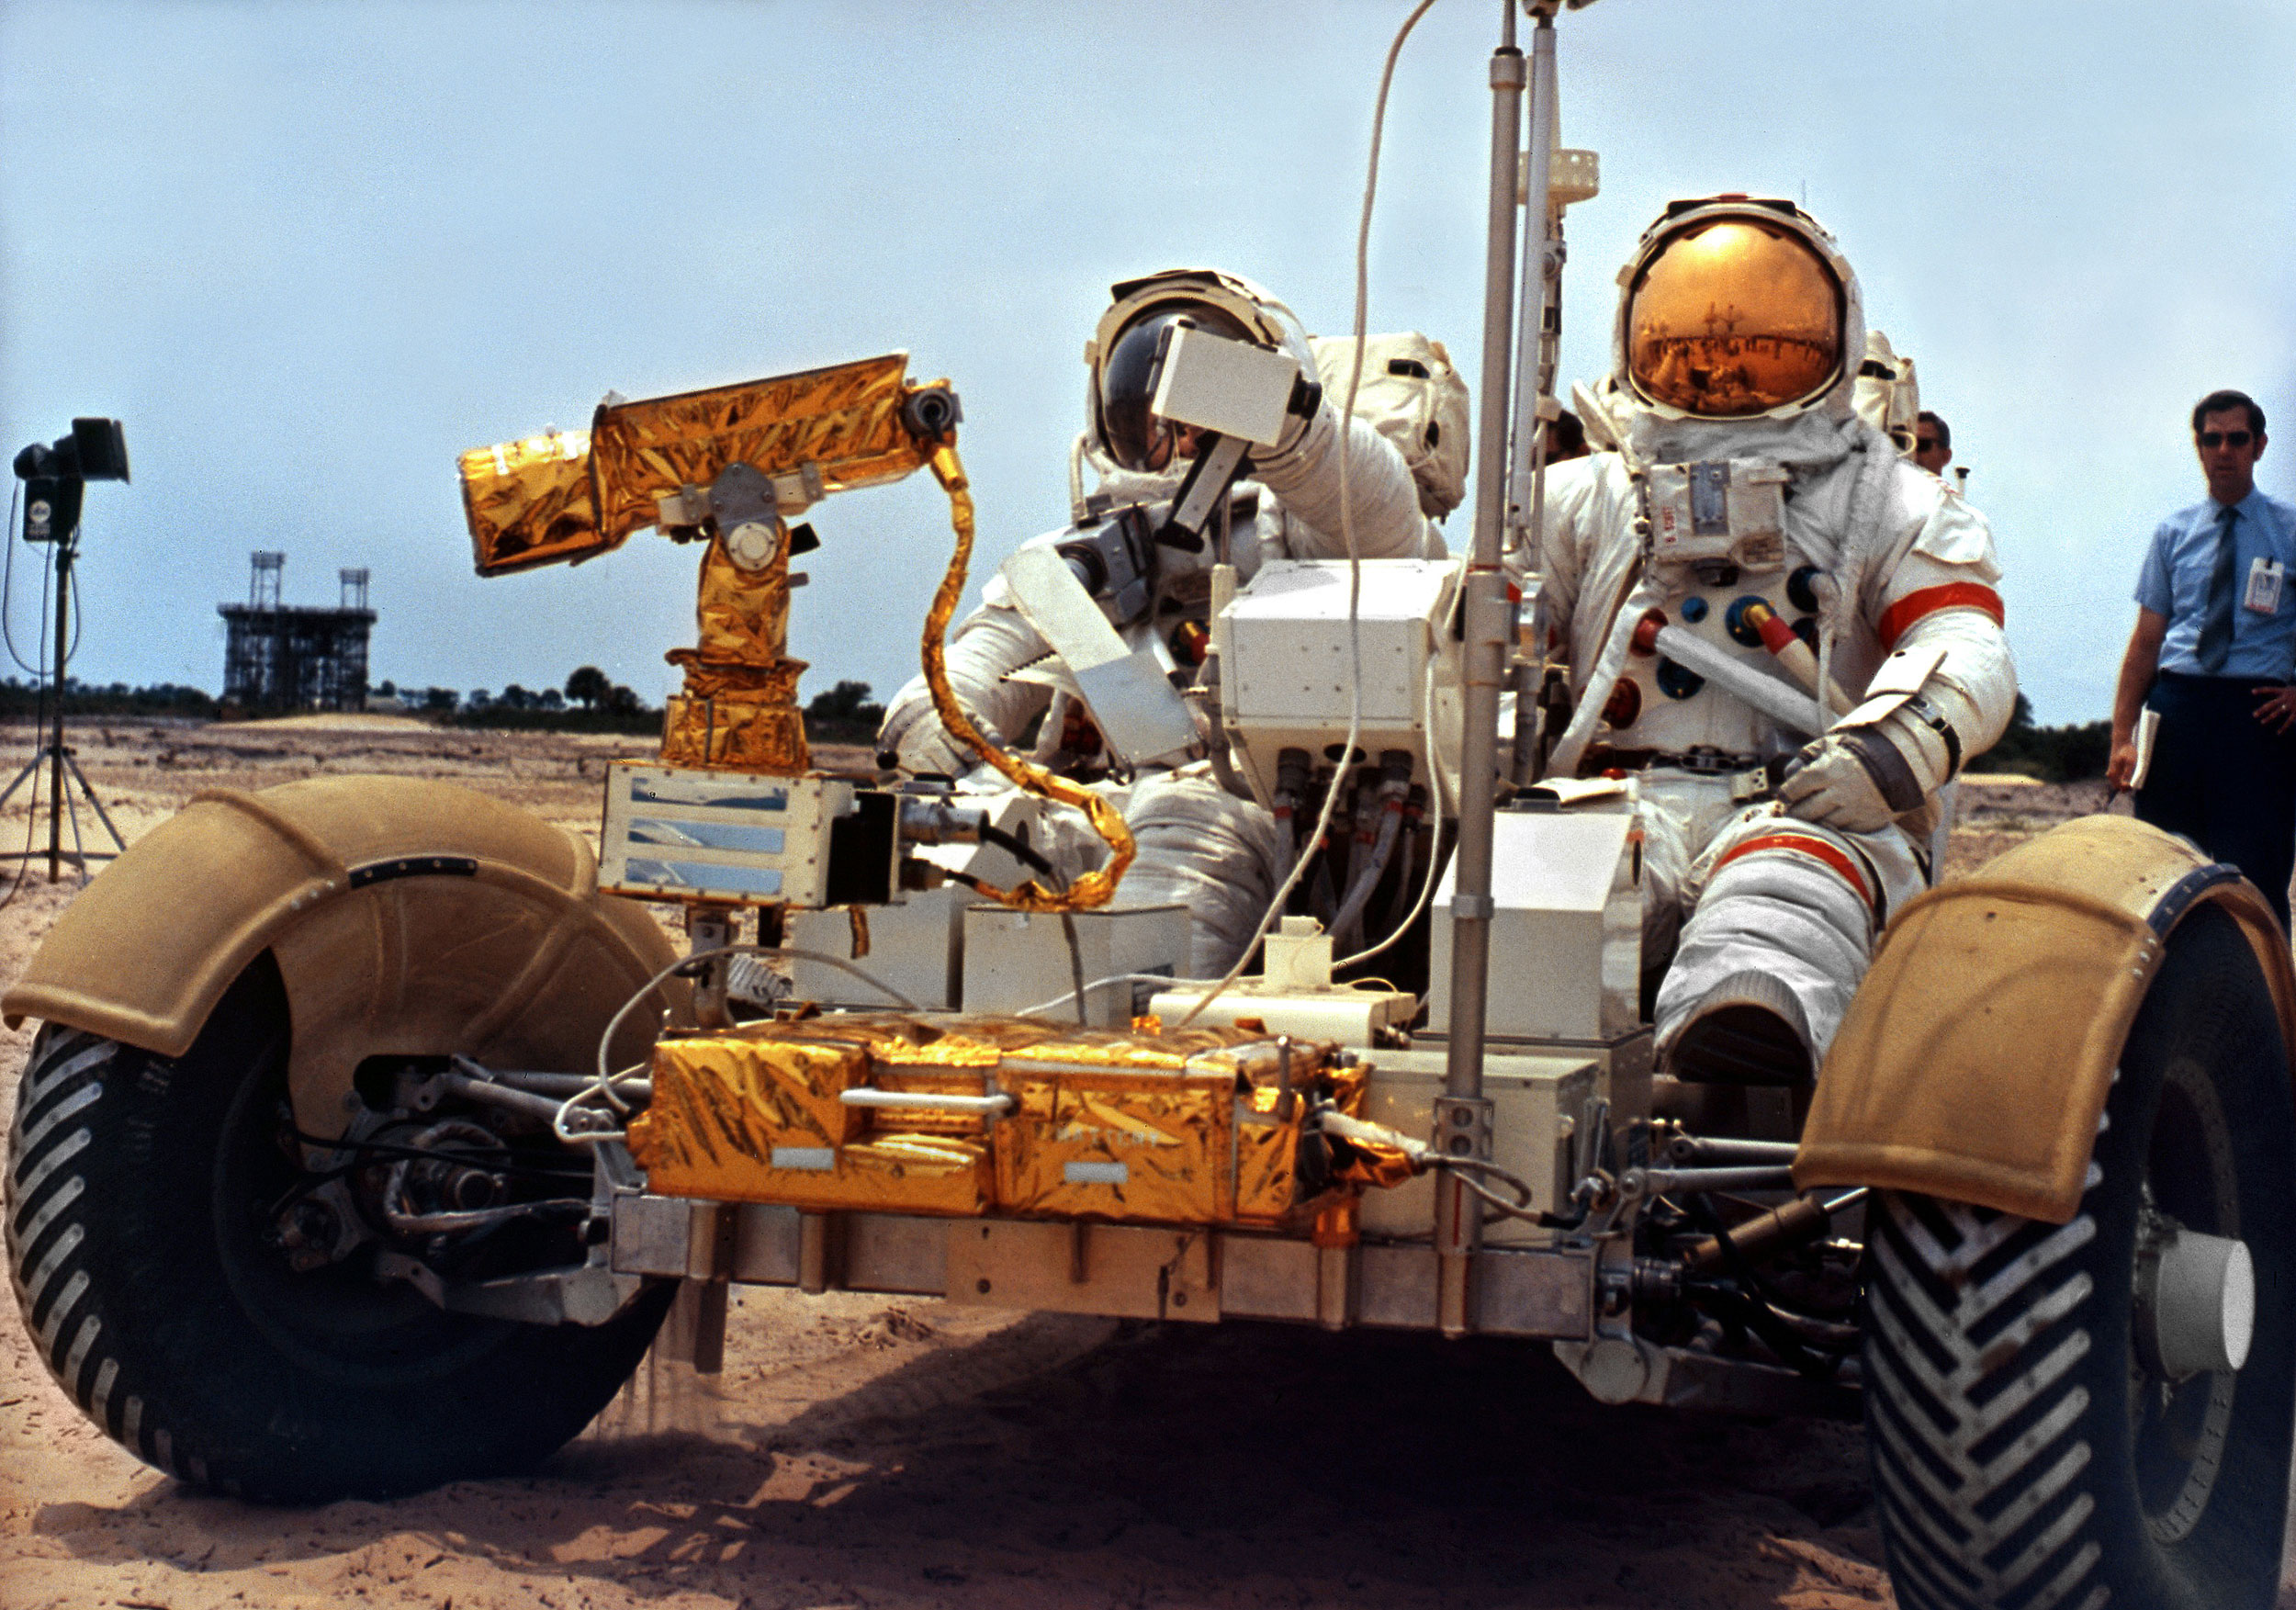 David Scott, commander, at right, and James Irwin, lunar module pilot, at left. train with the Lunar Roving Vehicle (LRV). Credit: NASA via Retro Space Images